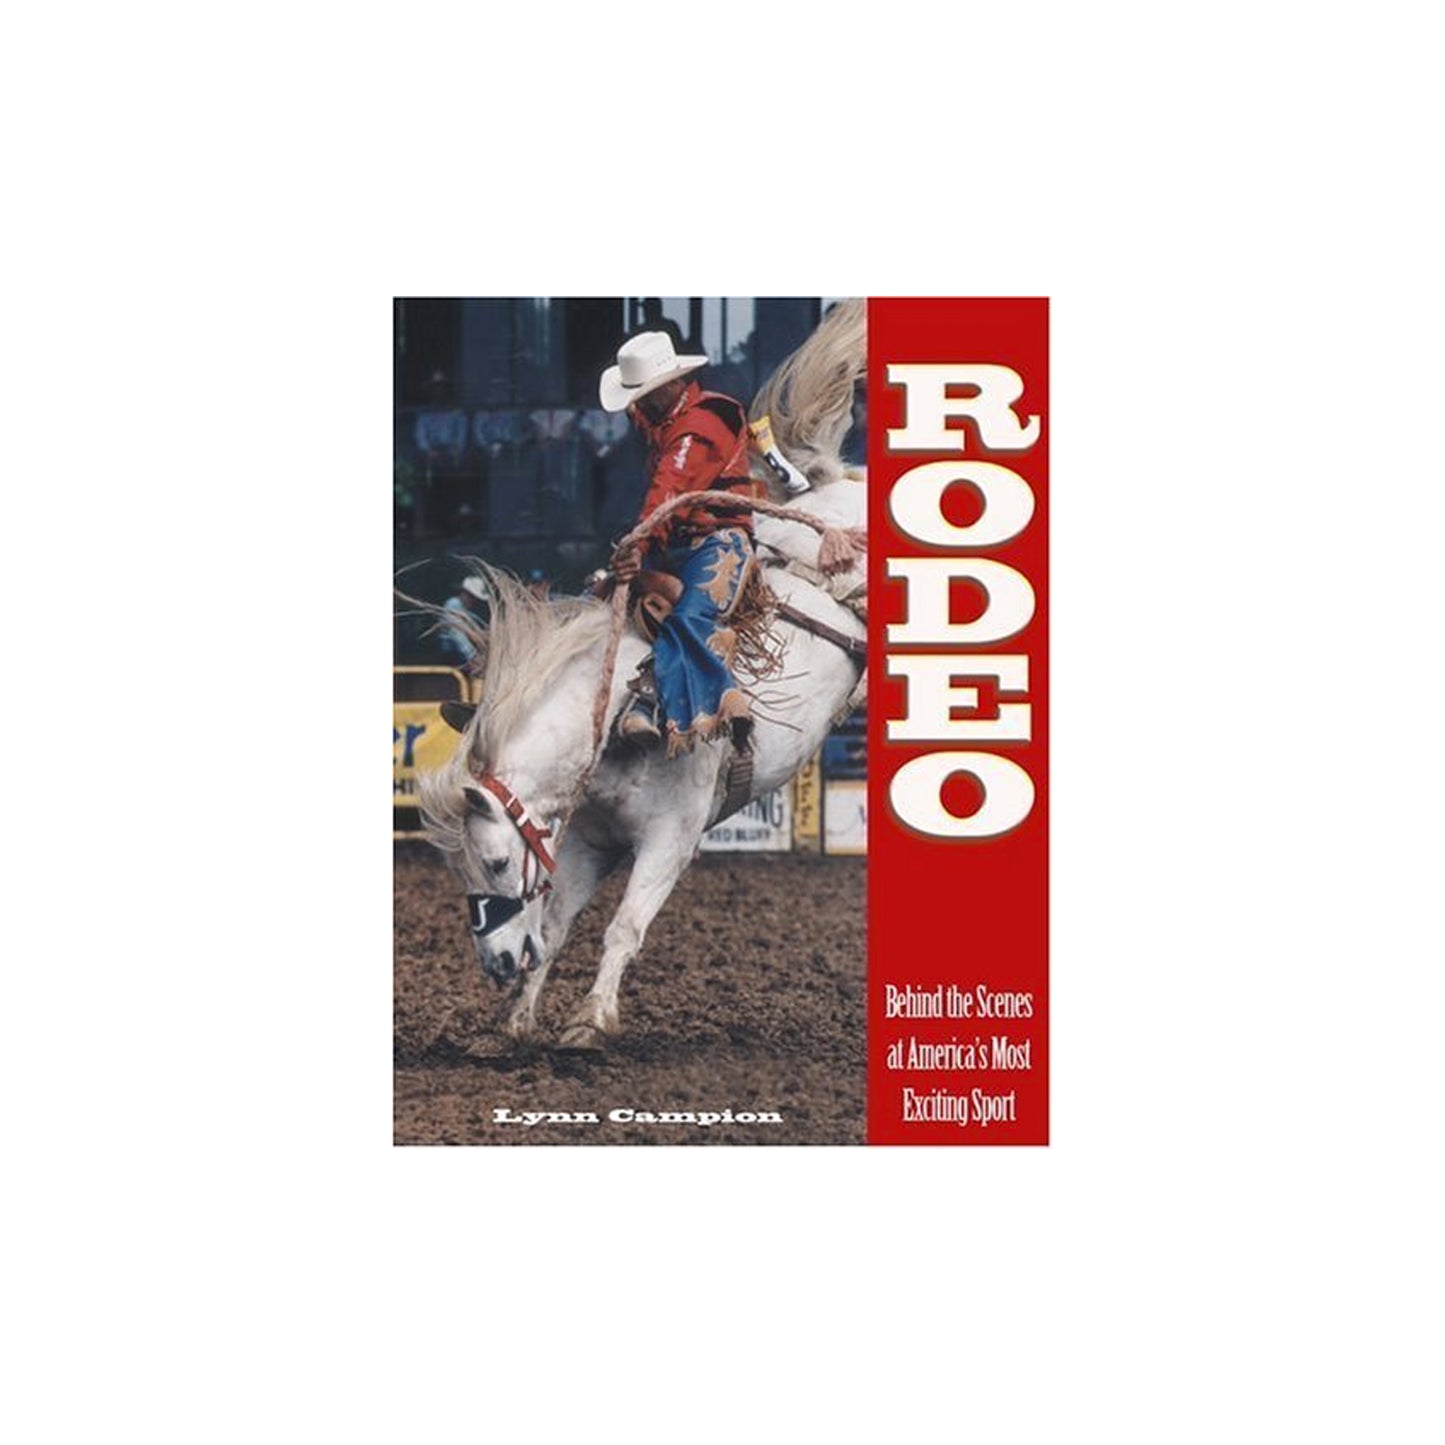 Rodeo: Behind the Scenes at America's Most Exciting Sport by Lynn Campion